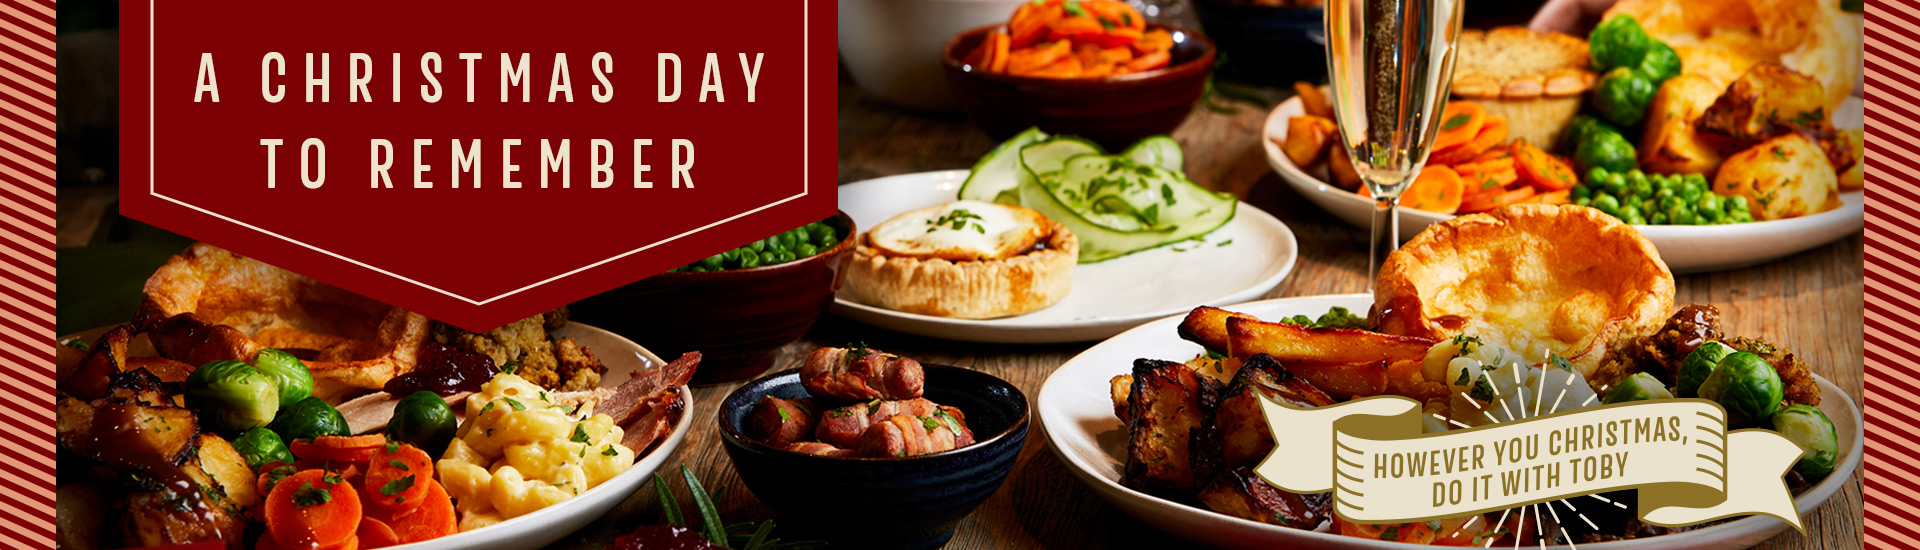 Christmas Day menu at Toby Carvery Romford